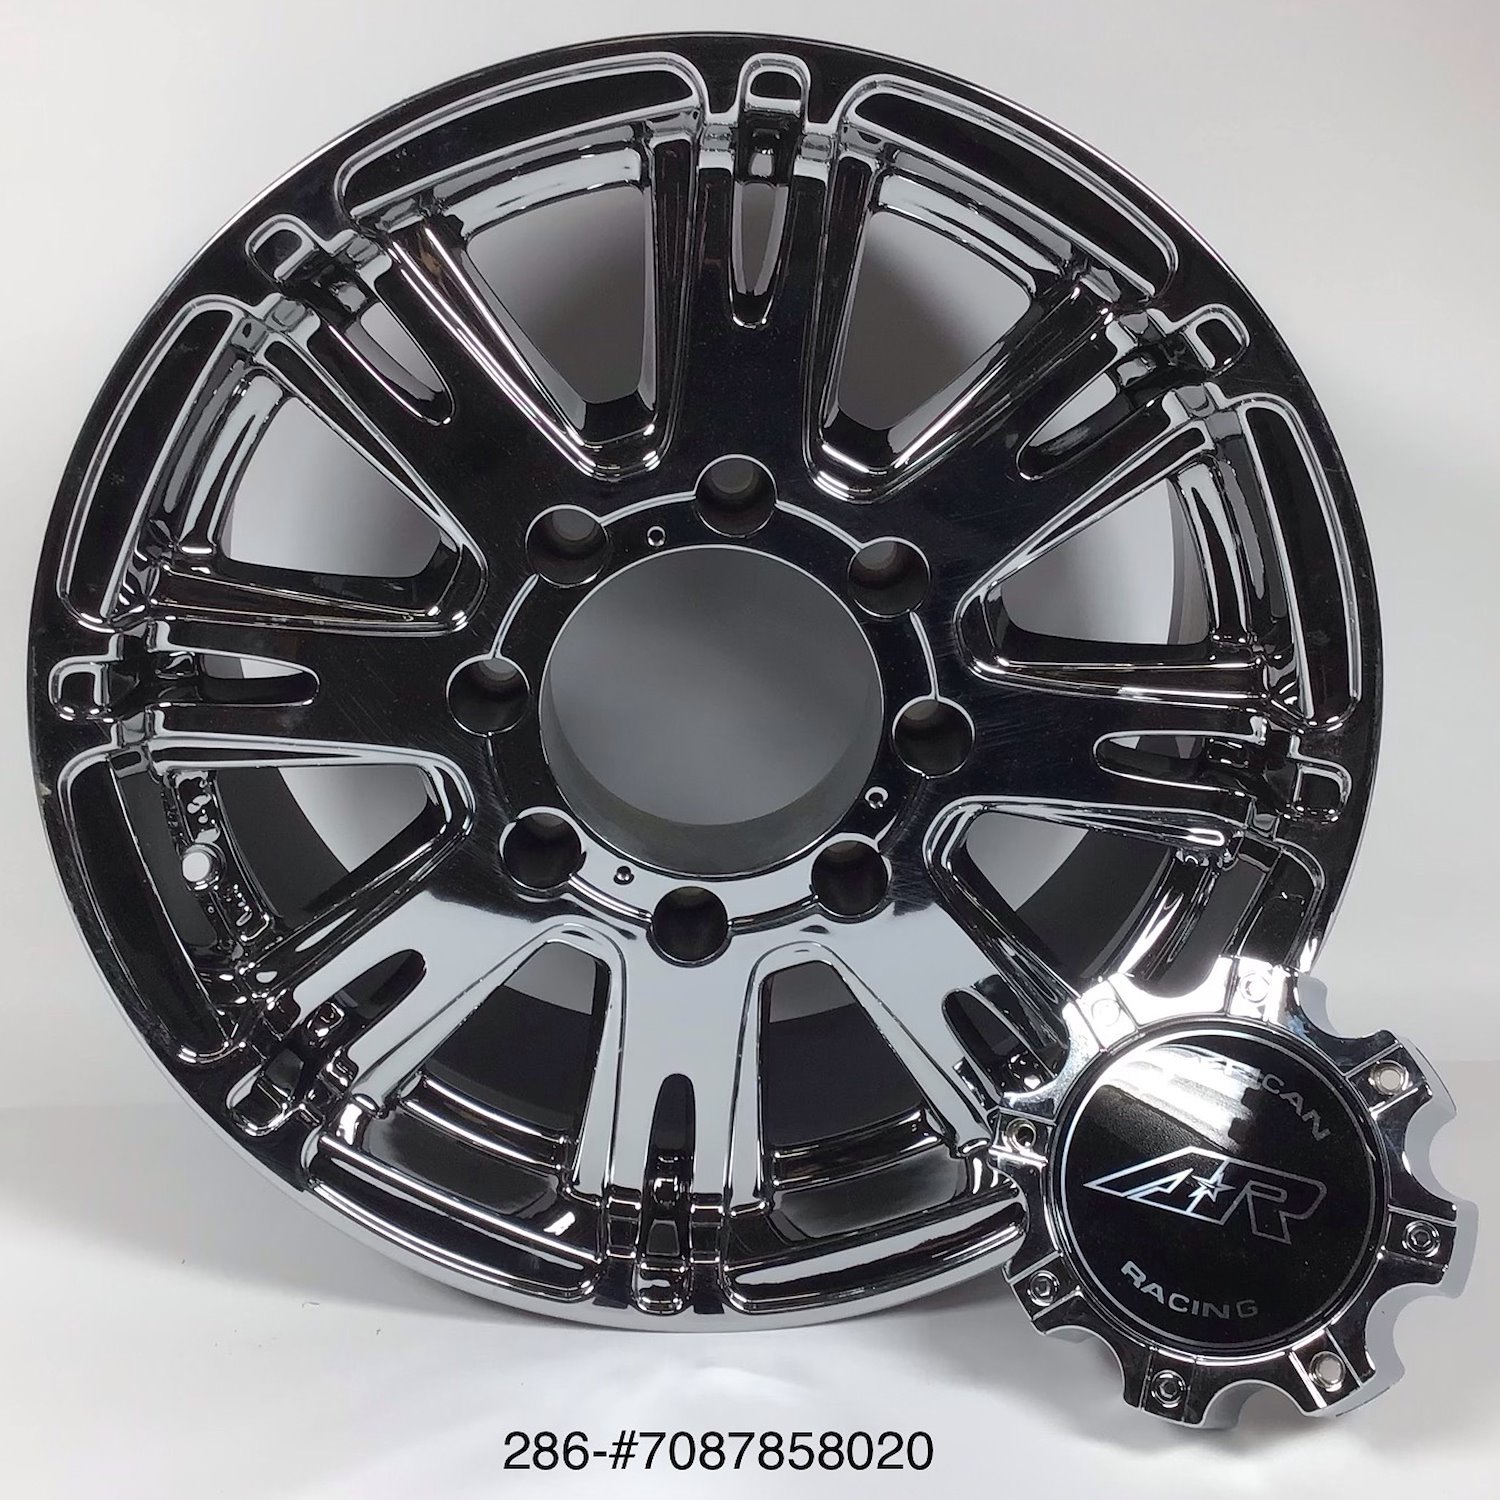 *BLEMISHED* AR708 Series Ribelle Wheel Size: 17